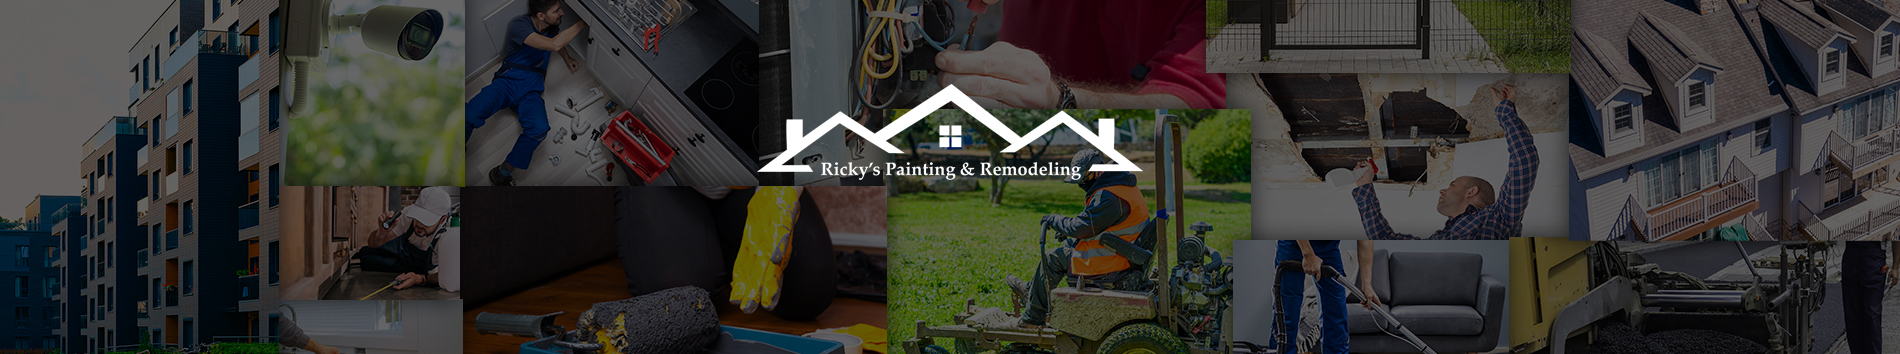 Ricky’s Painting & Remodeling